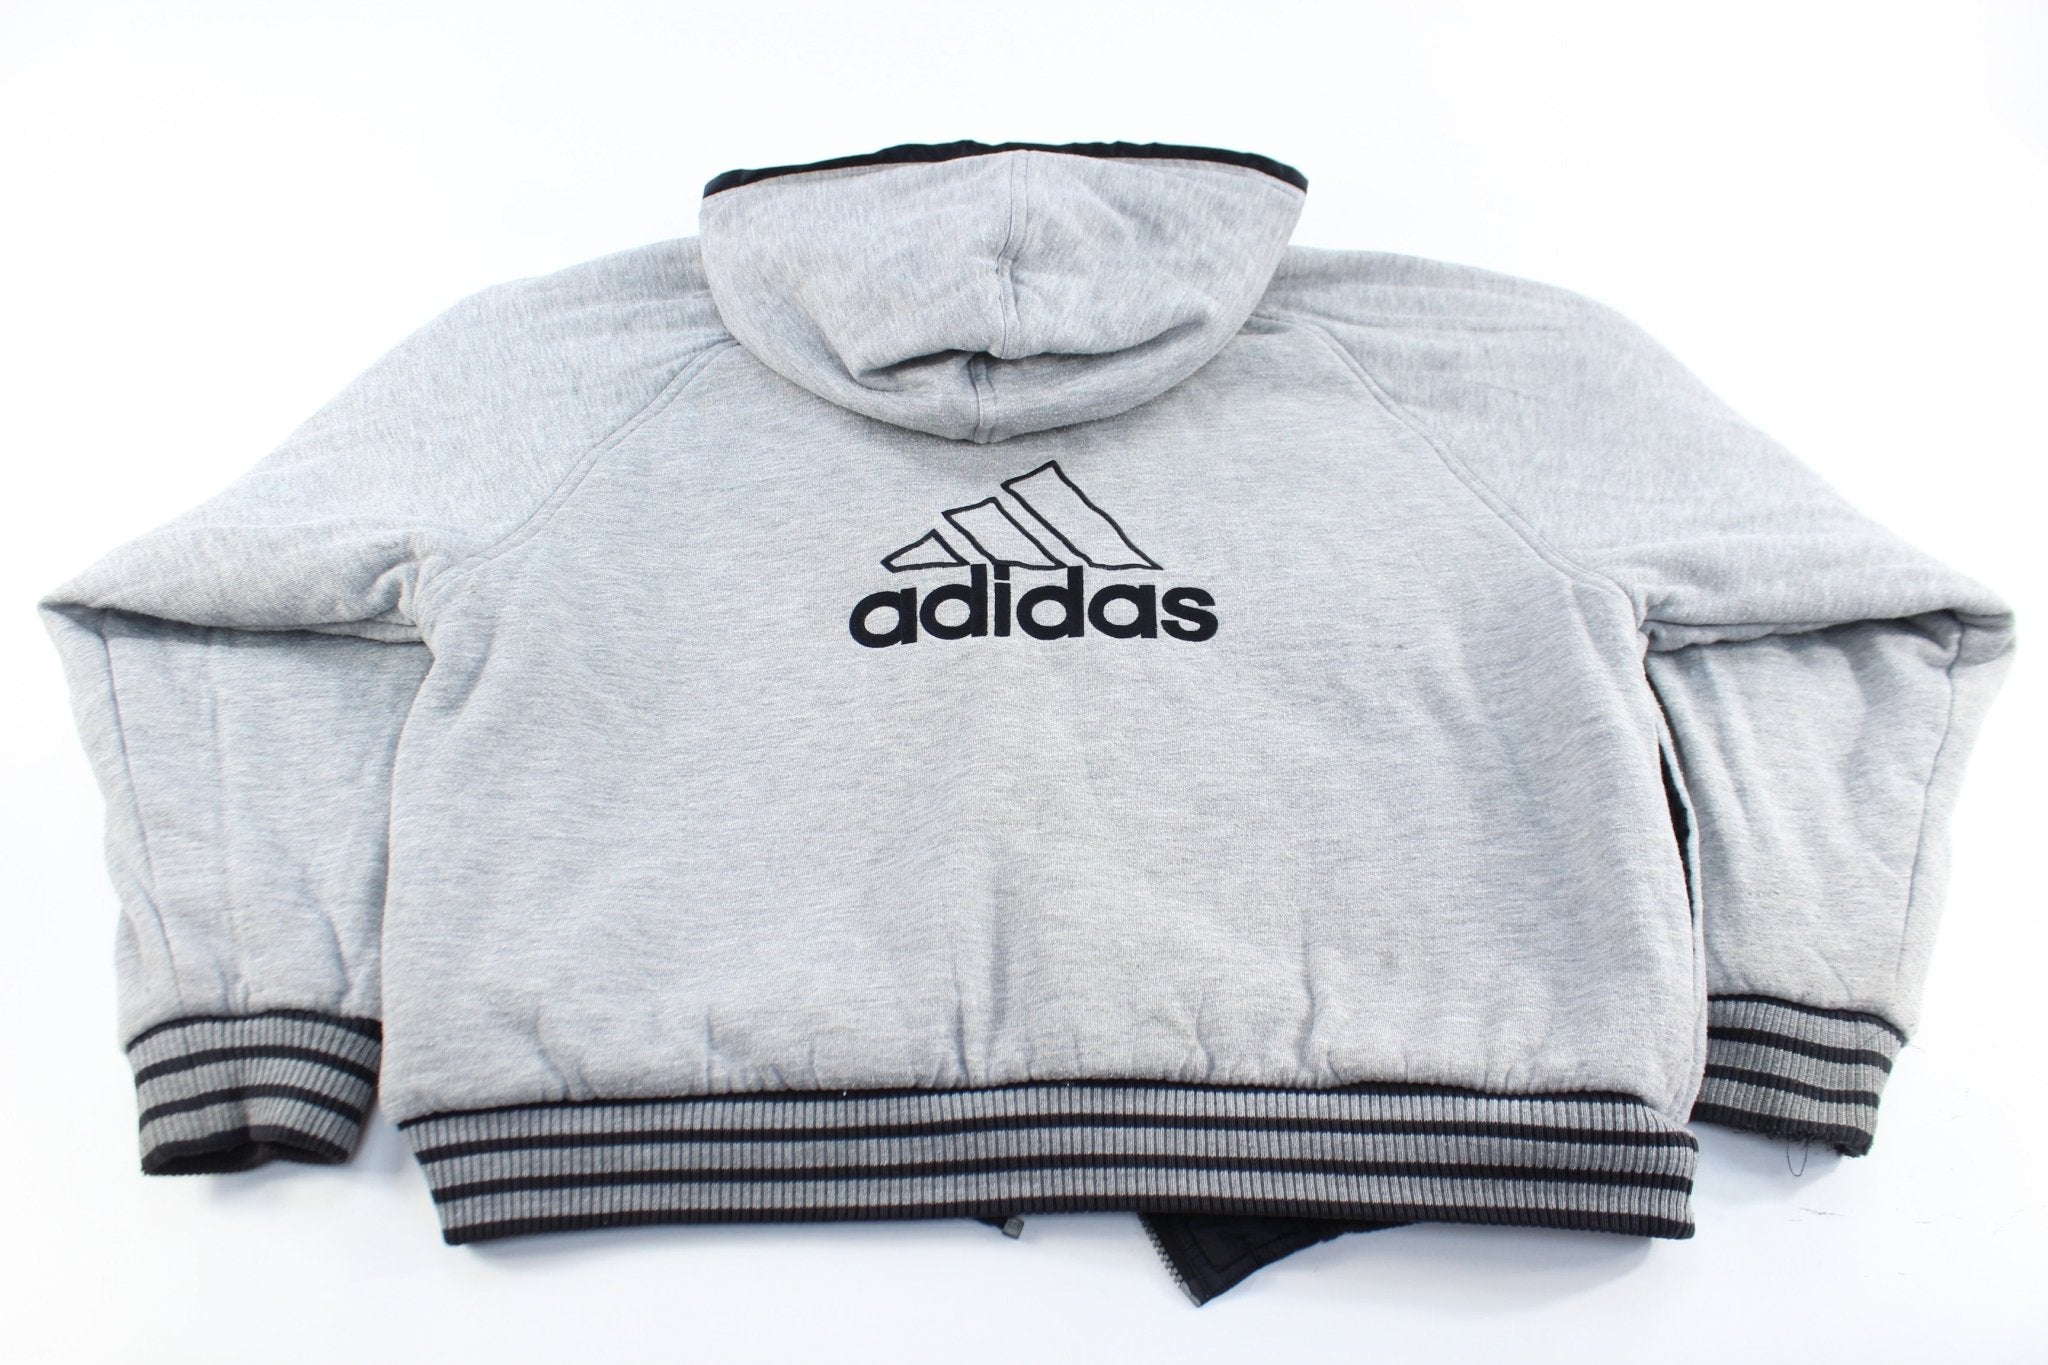 Adidas Embroidered Logo Reversible Zip Up Jacket - ThriftedThreads.com